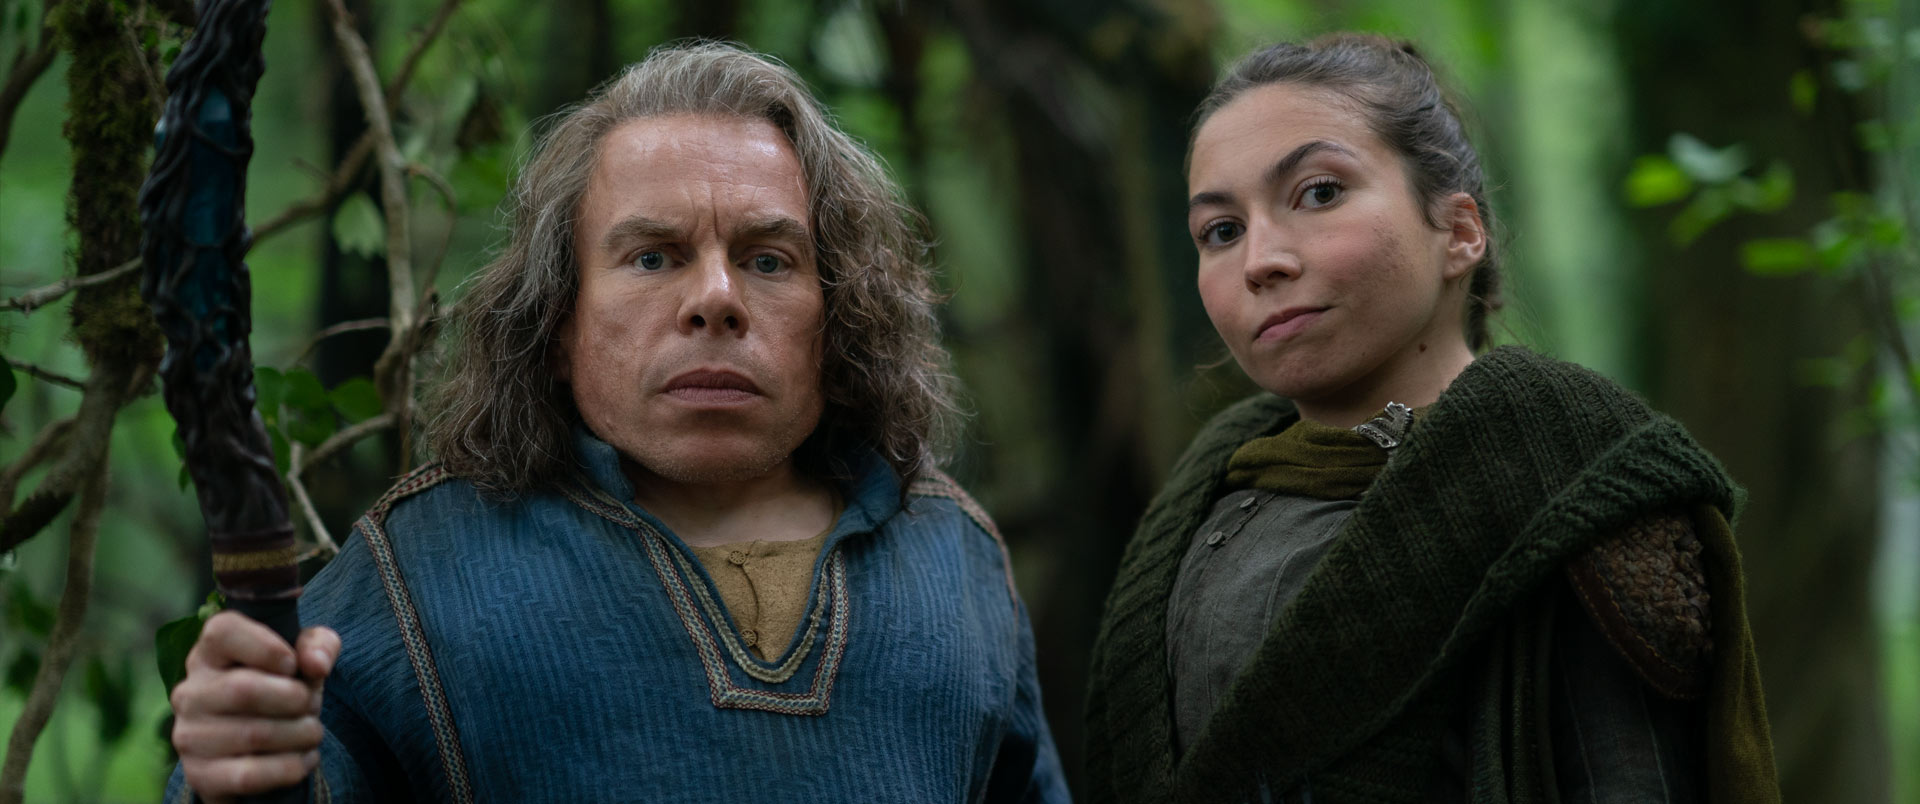 Mims is played by Annabelle Davis, Warwick Davis’ real-life daughter.